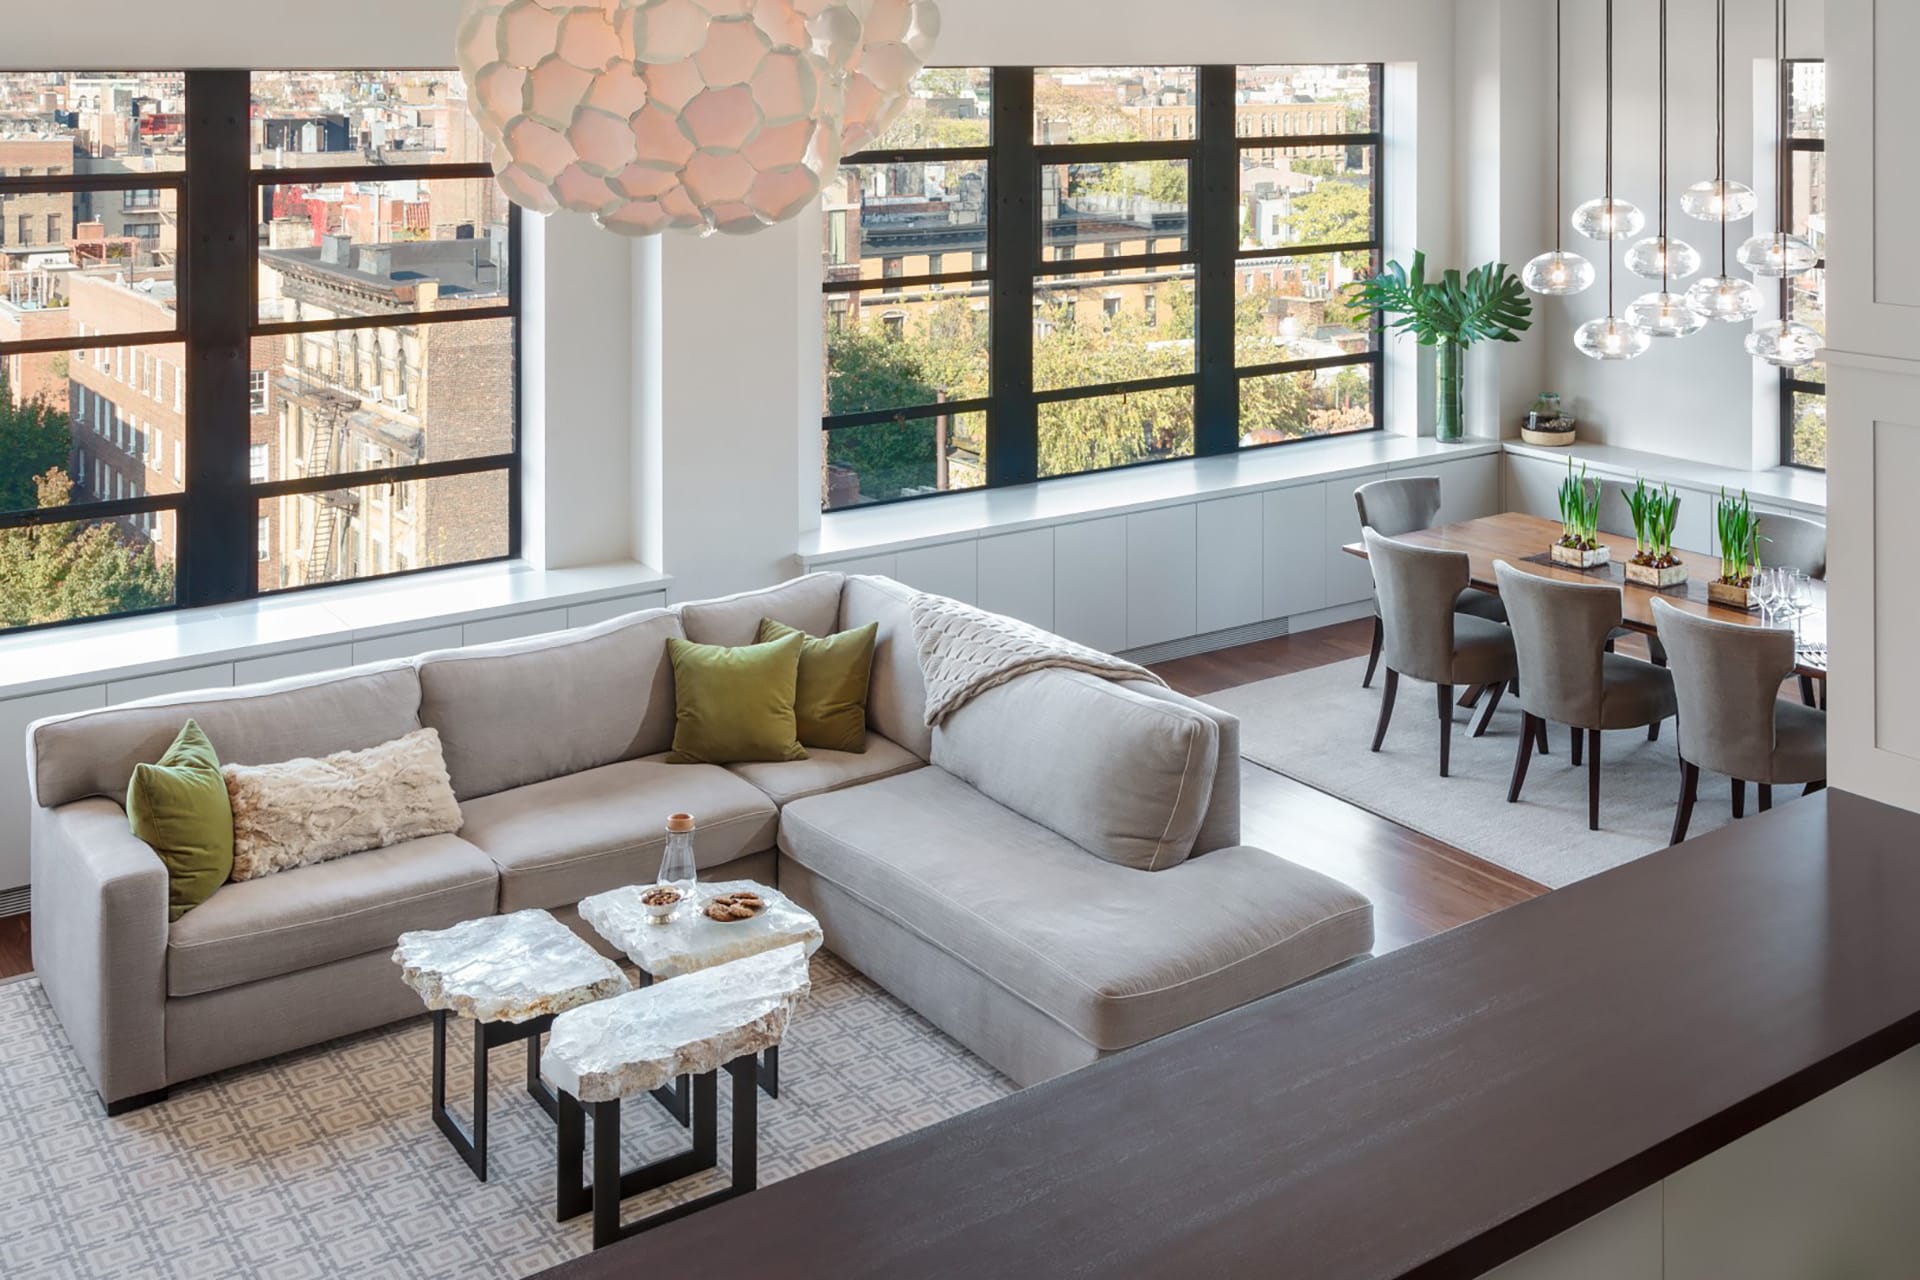 Looking down at the living and dining area from an upper-level balcony in a West Village penthouse.